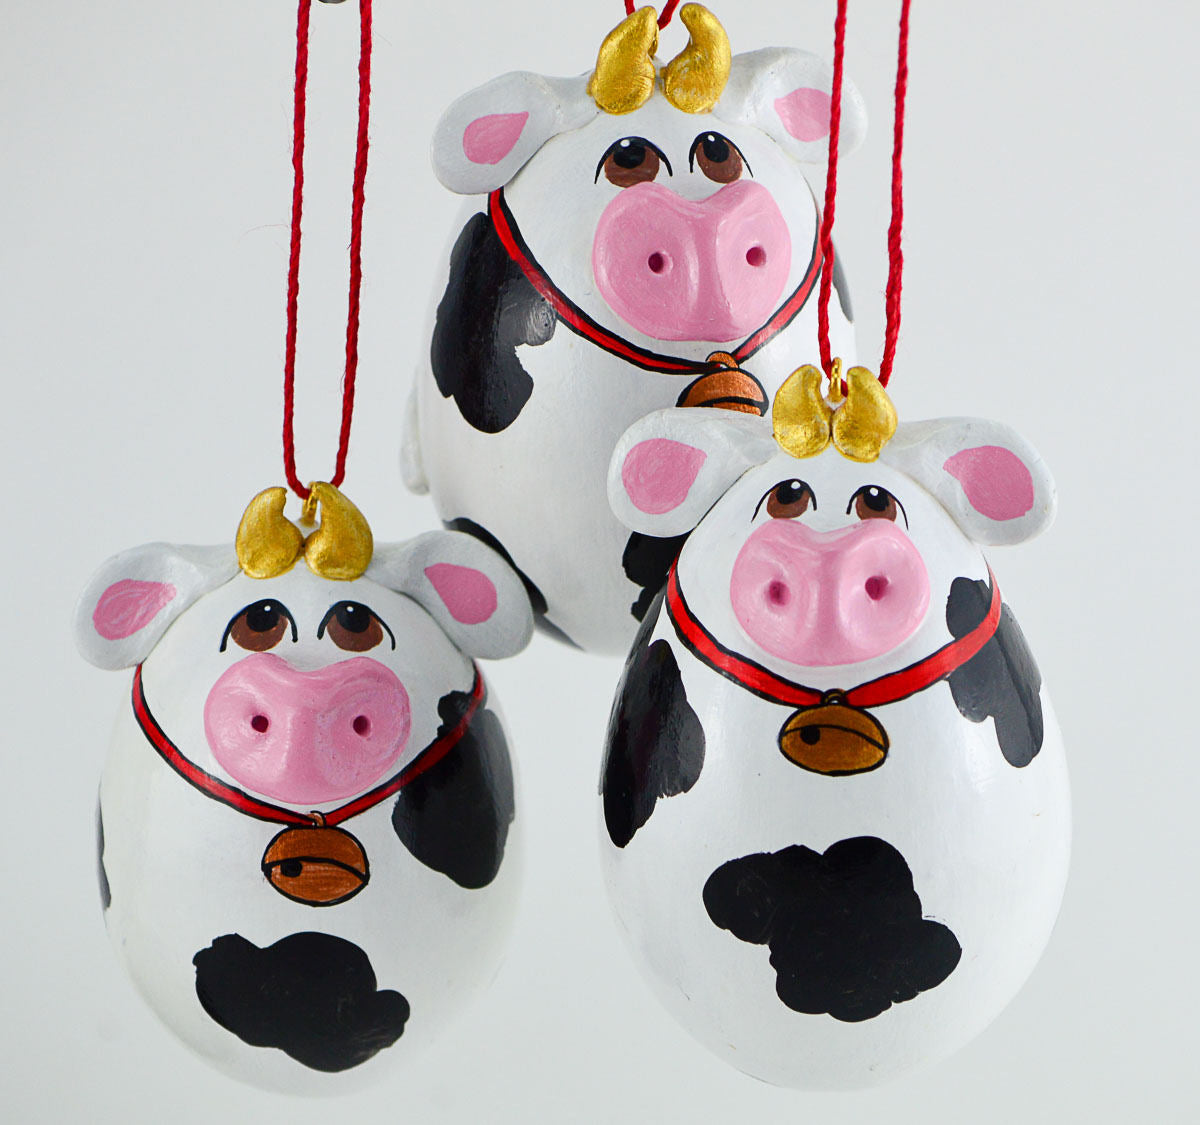 Cow Ornament, Gourd Art, Cow Decor, Holstein Cow, Novelty gift item, Cow Gifts, Painted Gourd, Spotted cow, Gourdament, Egg Gourd,  Cow Bell - Gourdaments